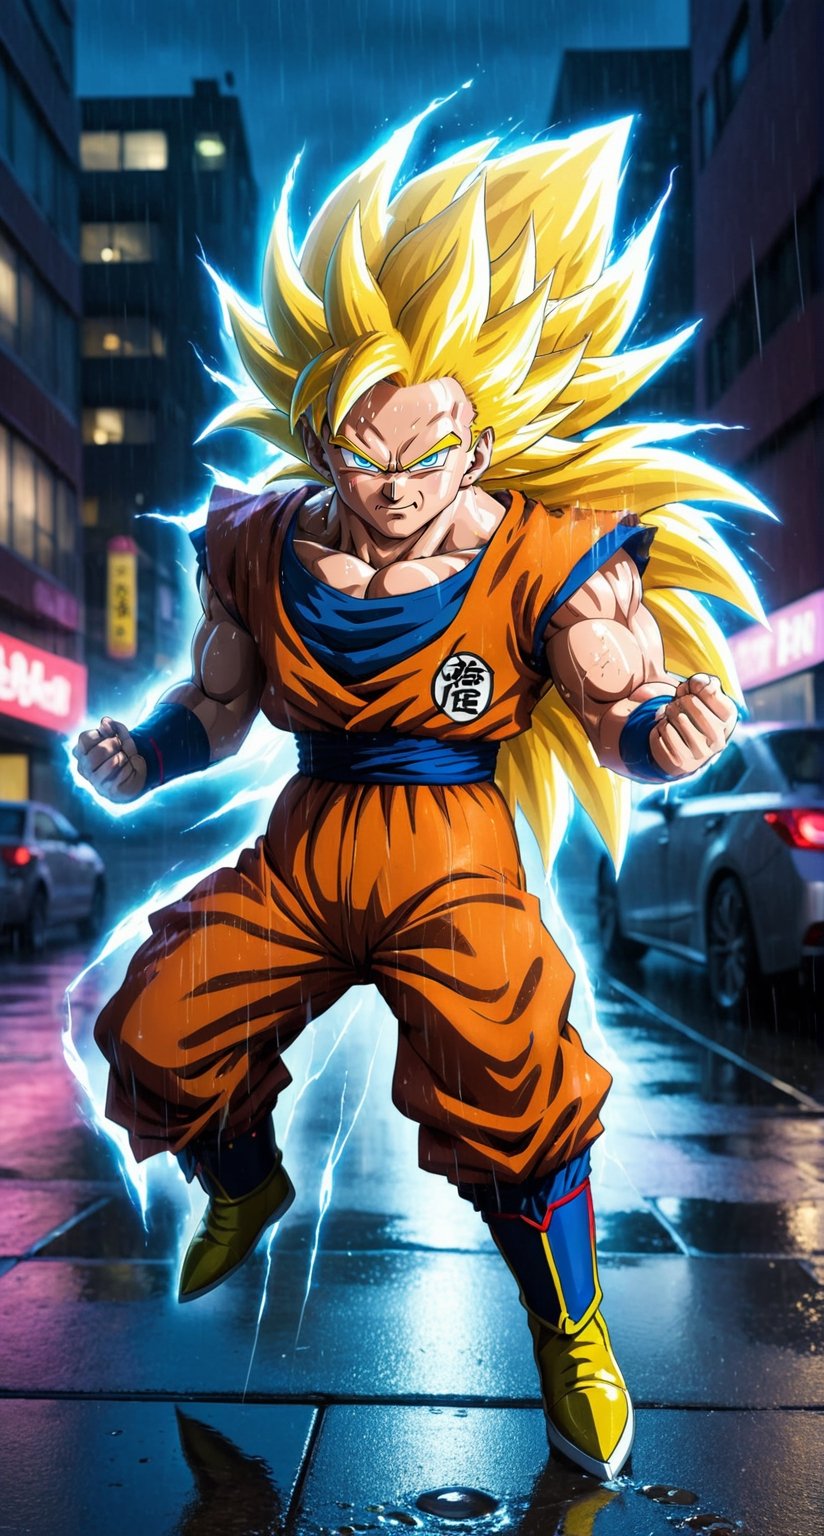 Masterpiece in UHD resolution, action anime style with a focus on lighting and movement effects, inspired by the works of Akira Toriyama and Toyotaro. | Goku transformed into Super Saiyan 3, with long hair and a fiery golden aura, is in the middle of a city at night during a heavy rain. His eyes are filled with fury and determination, while his body radiates incredibly powerful ki. | The city is lit by neon lights in blue and purple, creating reflections on the damp buildings and puddles of water in the street. The camera angle is slightly tilted, enhancing the dramatic intensity of the scene. | The composition of the image follows the rule of thirds, with Goku positioned at the point of intersection of the lines. | Dramatic lighting effects and dynamic ki movement create a stunning contrast between the heavy rain and Goku's fiery energy. | Goku in his Super Saiyan 3 form, furious and radiating ki in the middle of a city at night during heavy rain. | ((perfect_composition, perfect_design, perfect_layout, perfect_detail, ultra_detailed, enhance_details, correct_imperfections)), ((More Detail, Enhance)),vegeta,gohan,Enhanced All